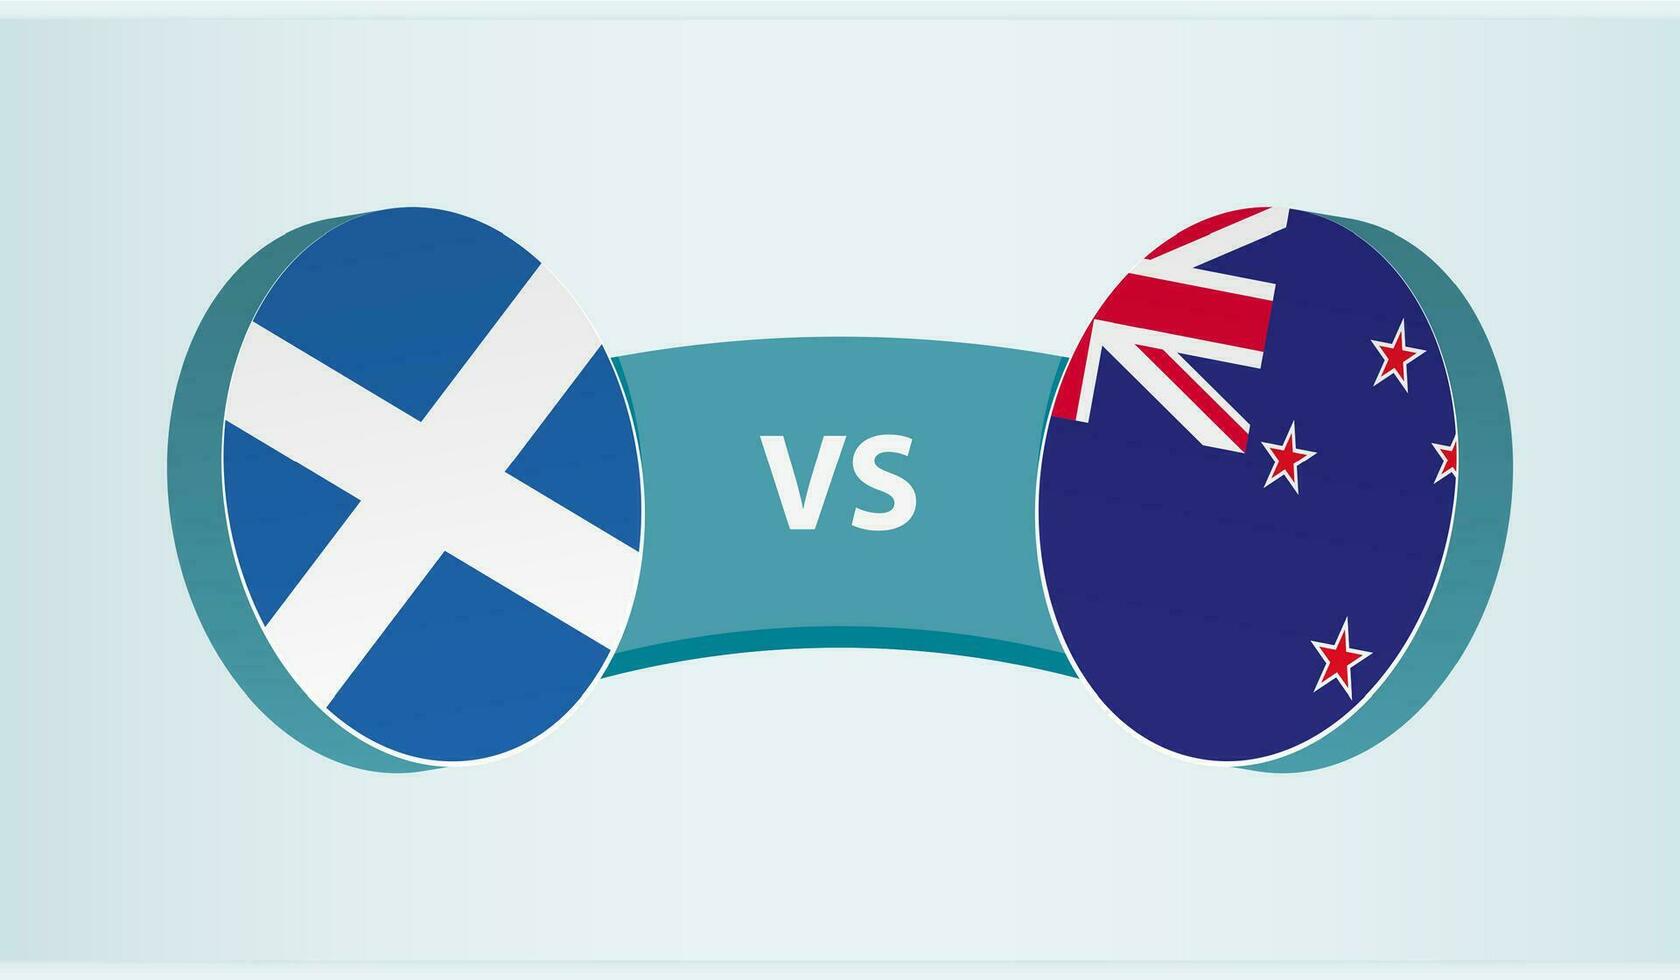 Scotland versus New Zealand, team sports competition concept. vector